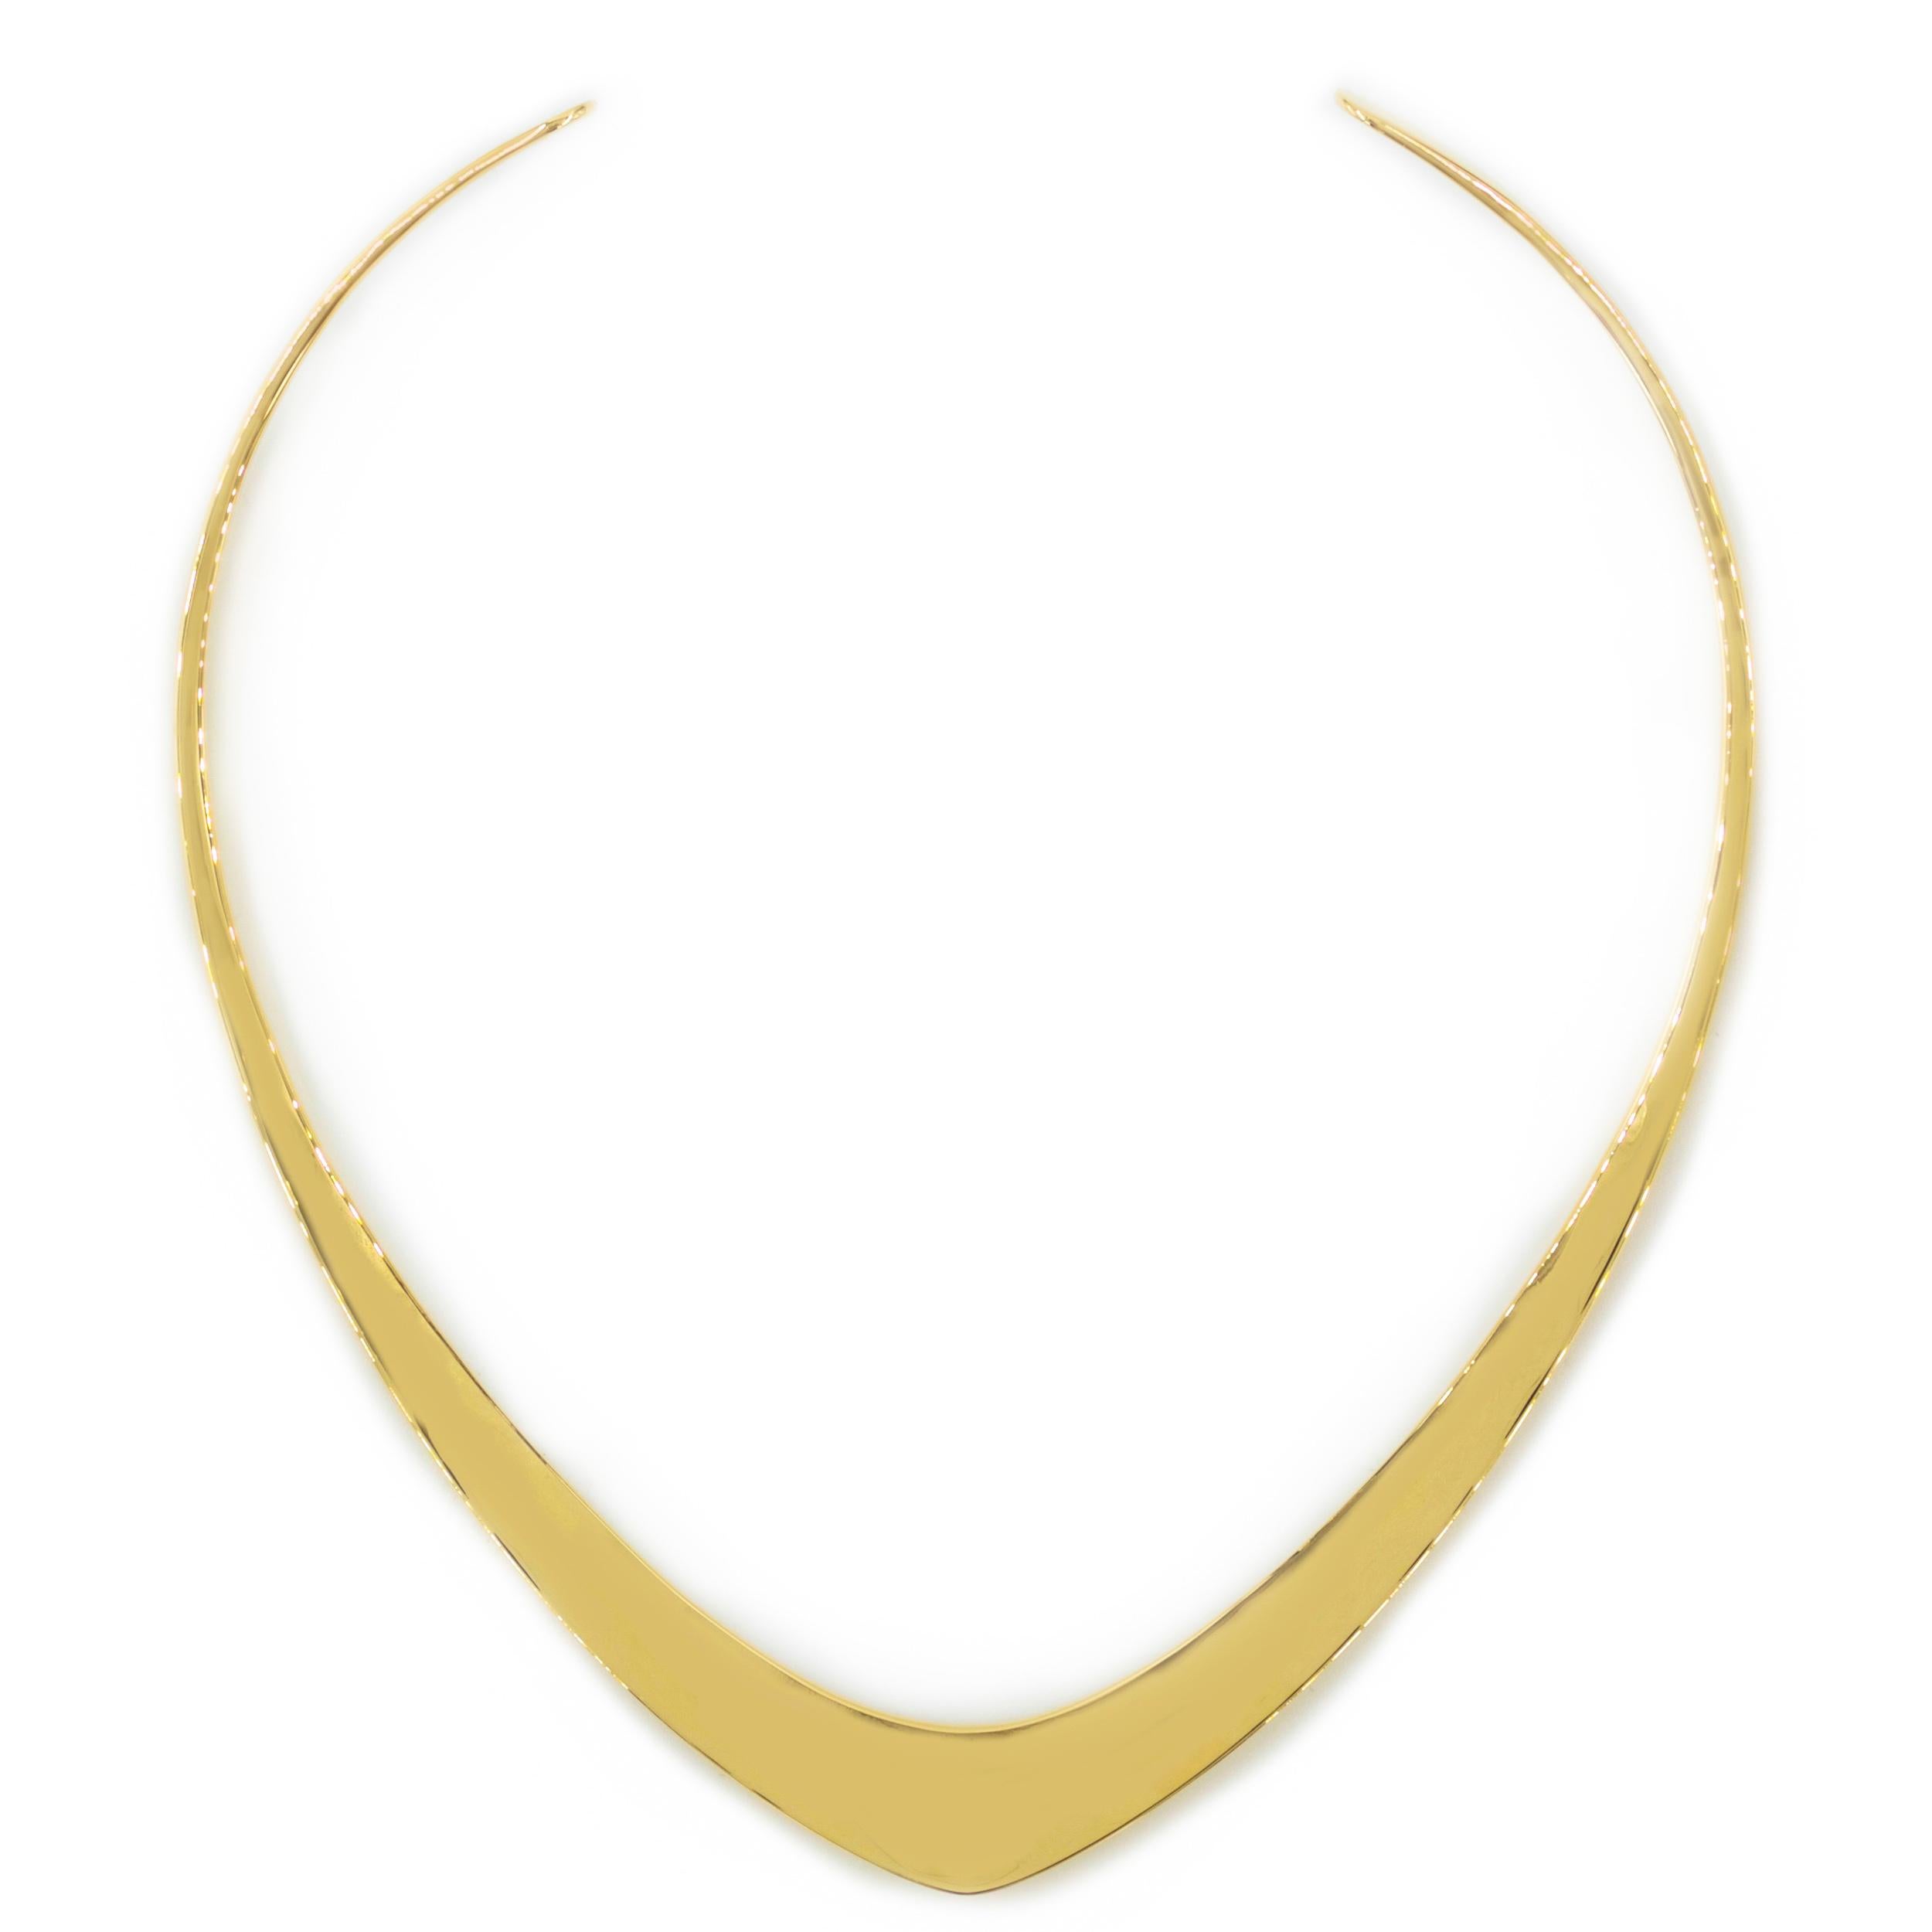 North American 14k Solid Gold Choker Collar Necklace by Ronald Hayes Pearson